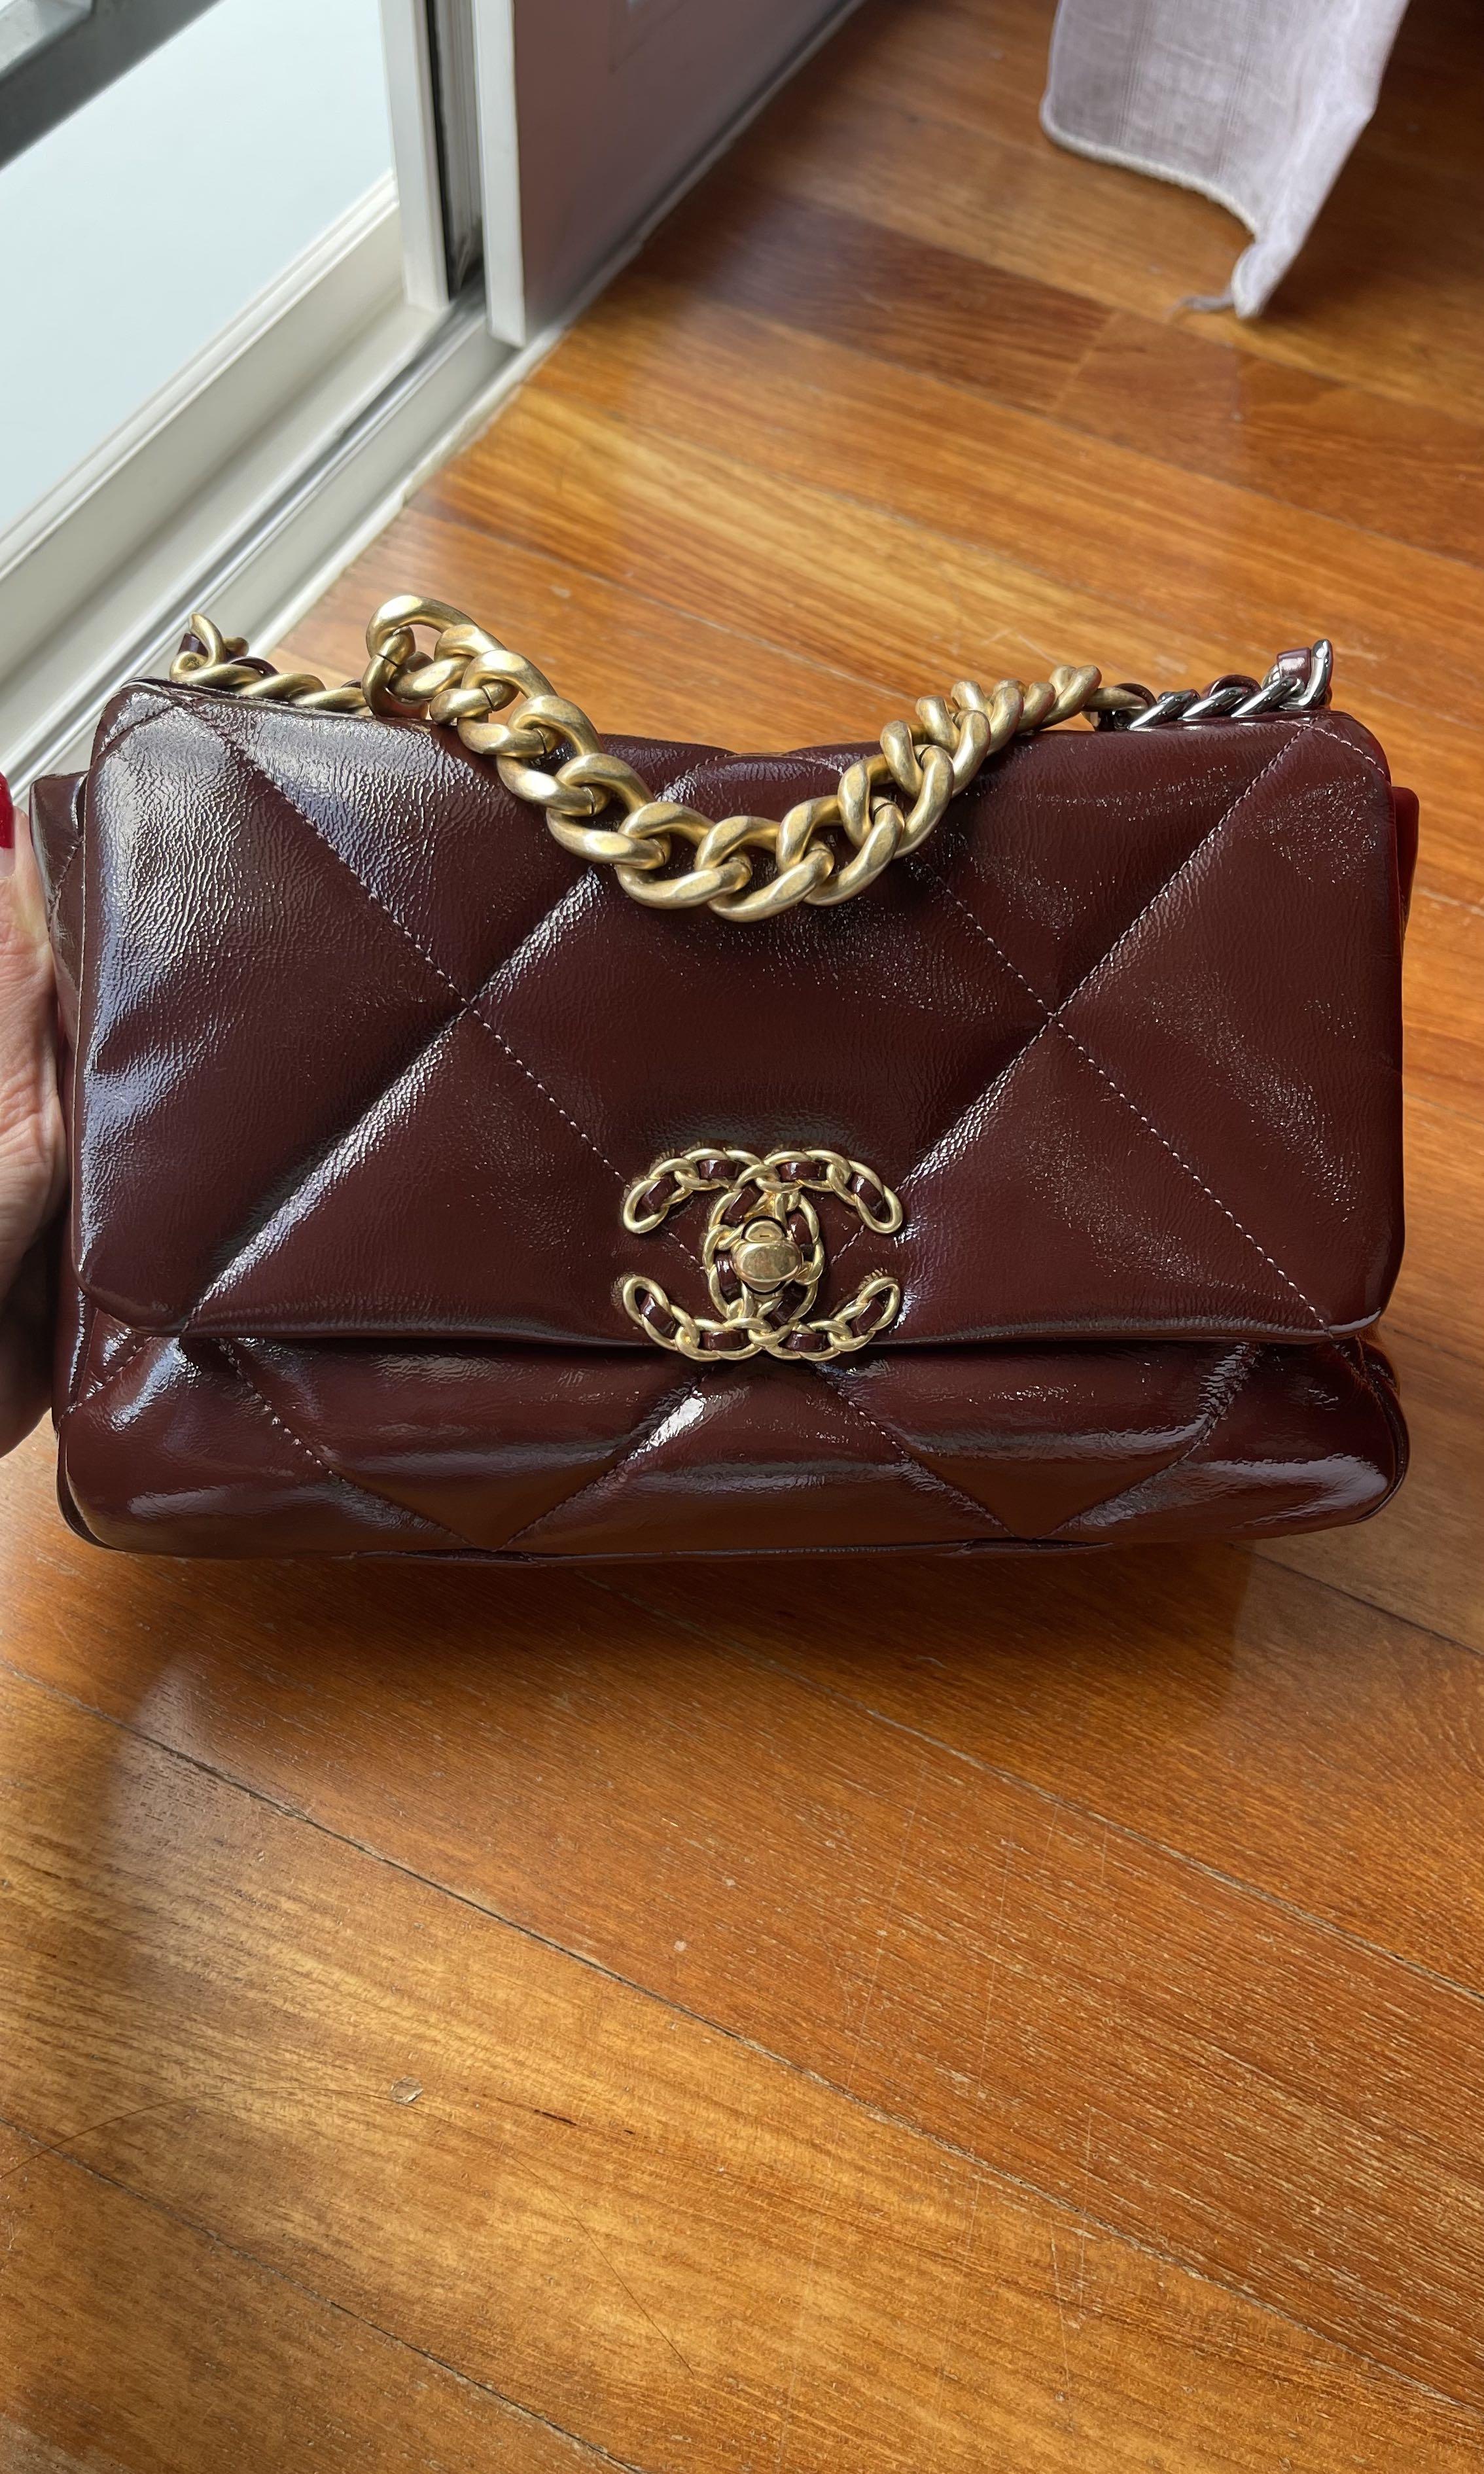 Chanel 19 Patent Burgundy Small Size